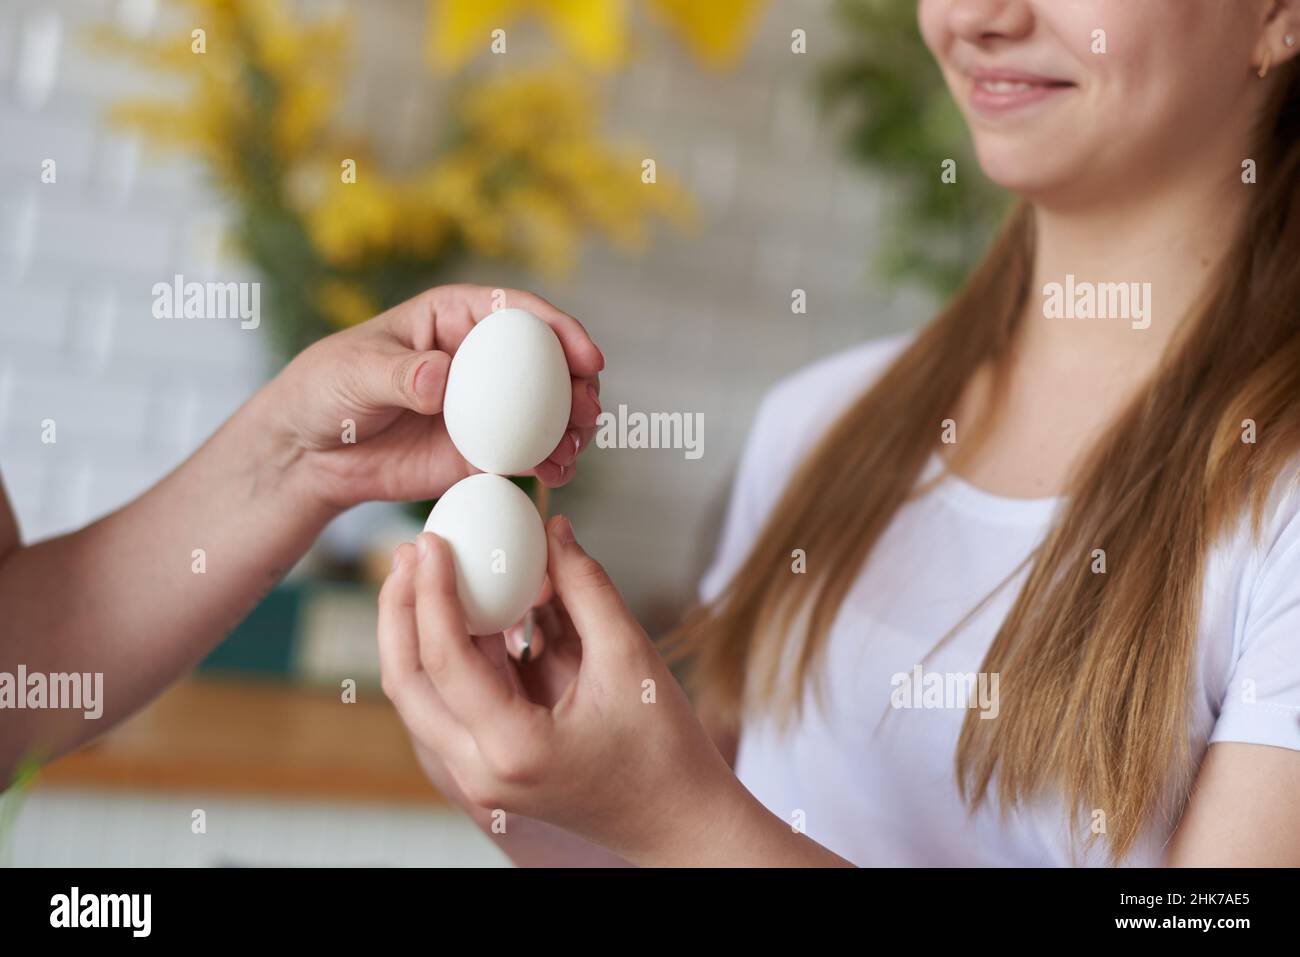 Two hands knock with eggs on the holiday of easter. Stock Photo